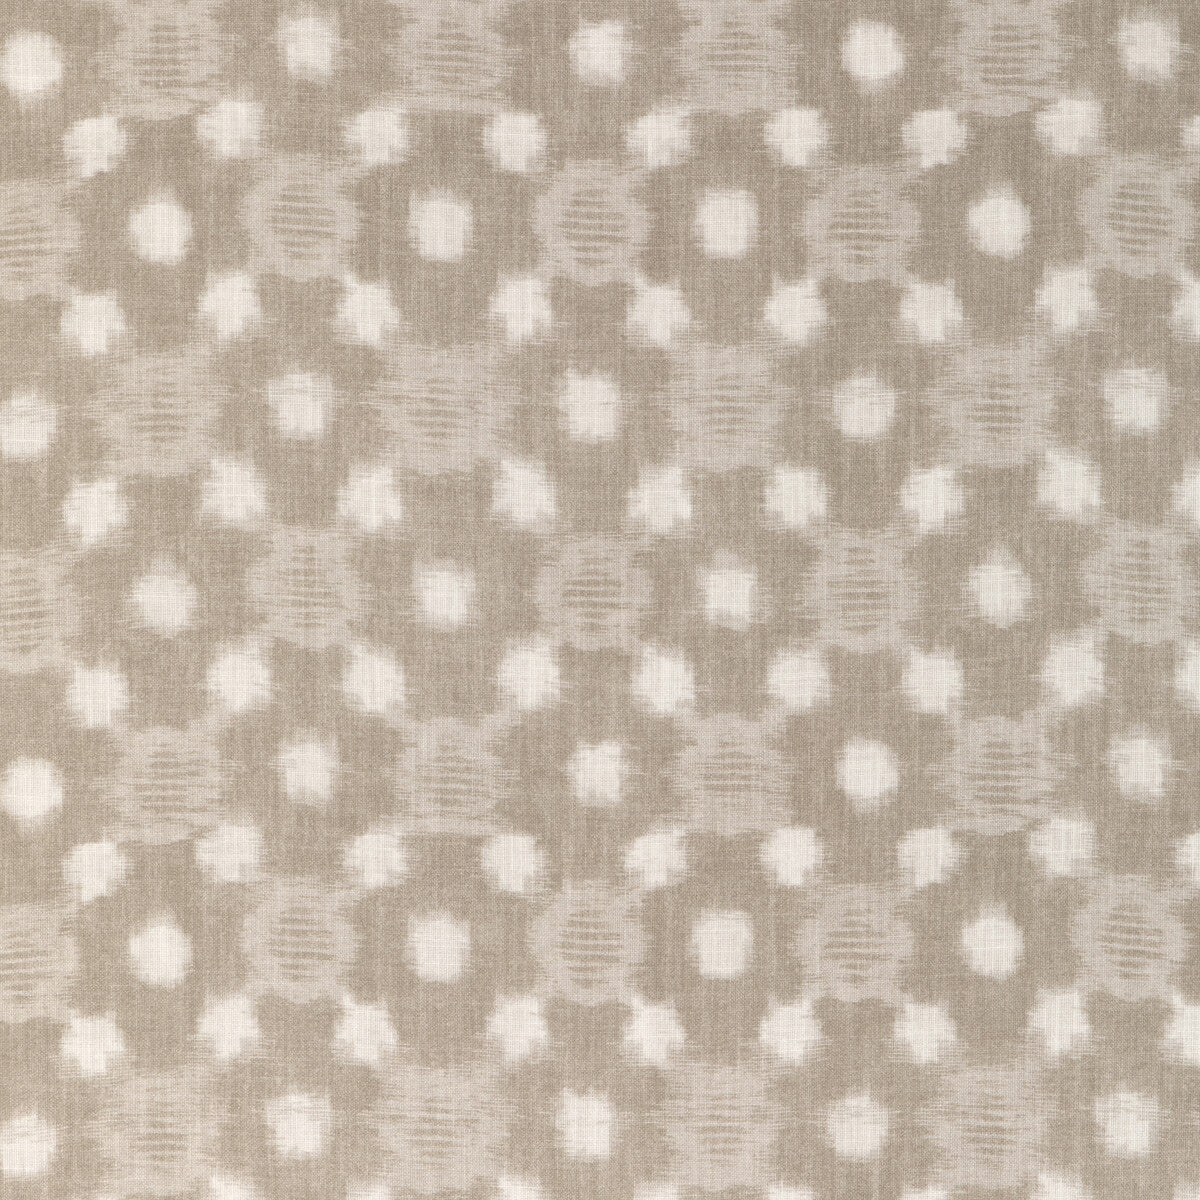 Anjuna fabric in driftwood color - pattern ANJUNA.16.0 - by Kravet Couture in the Riviera collection